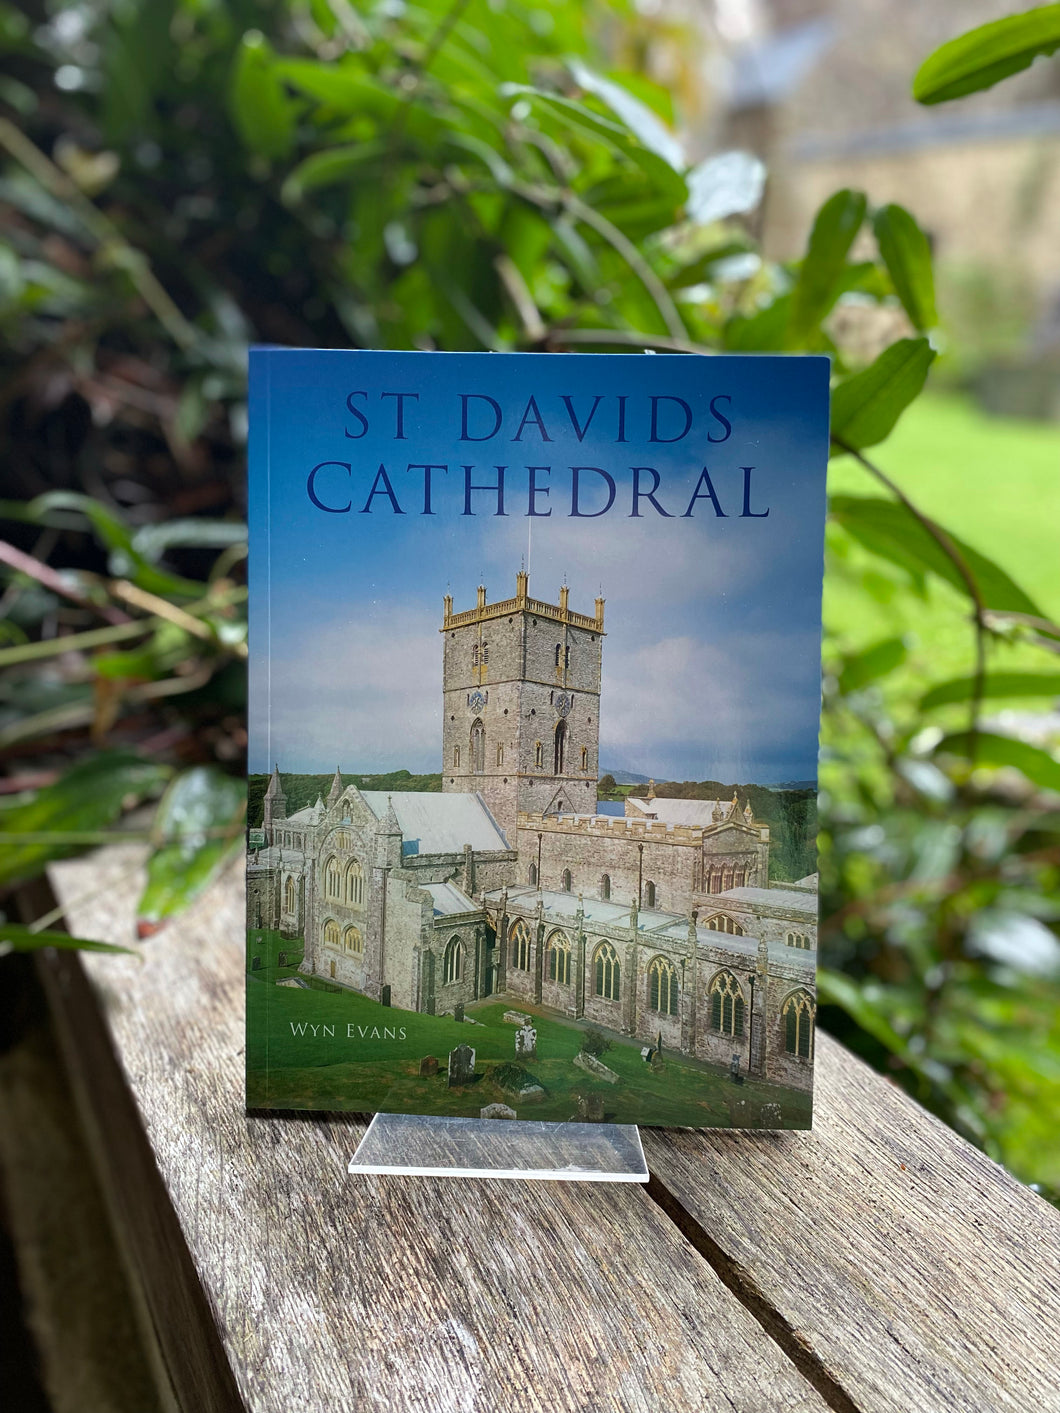 Guide Book on St Davids Cathedral written by Bishop Wyn Evans, previous Dean of St Davids Cathedral